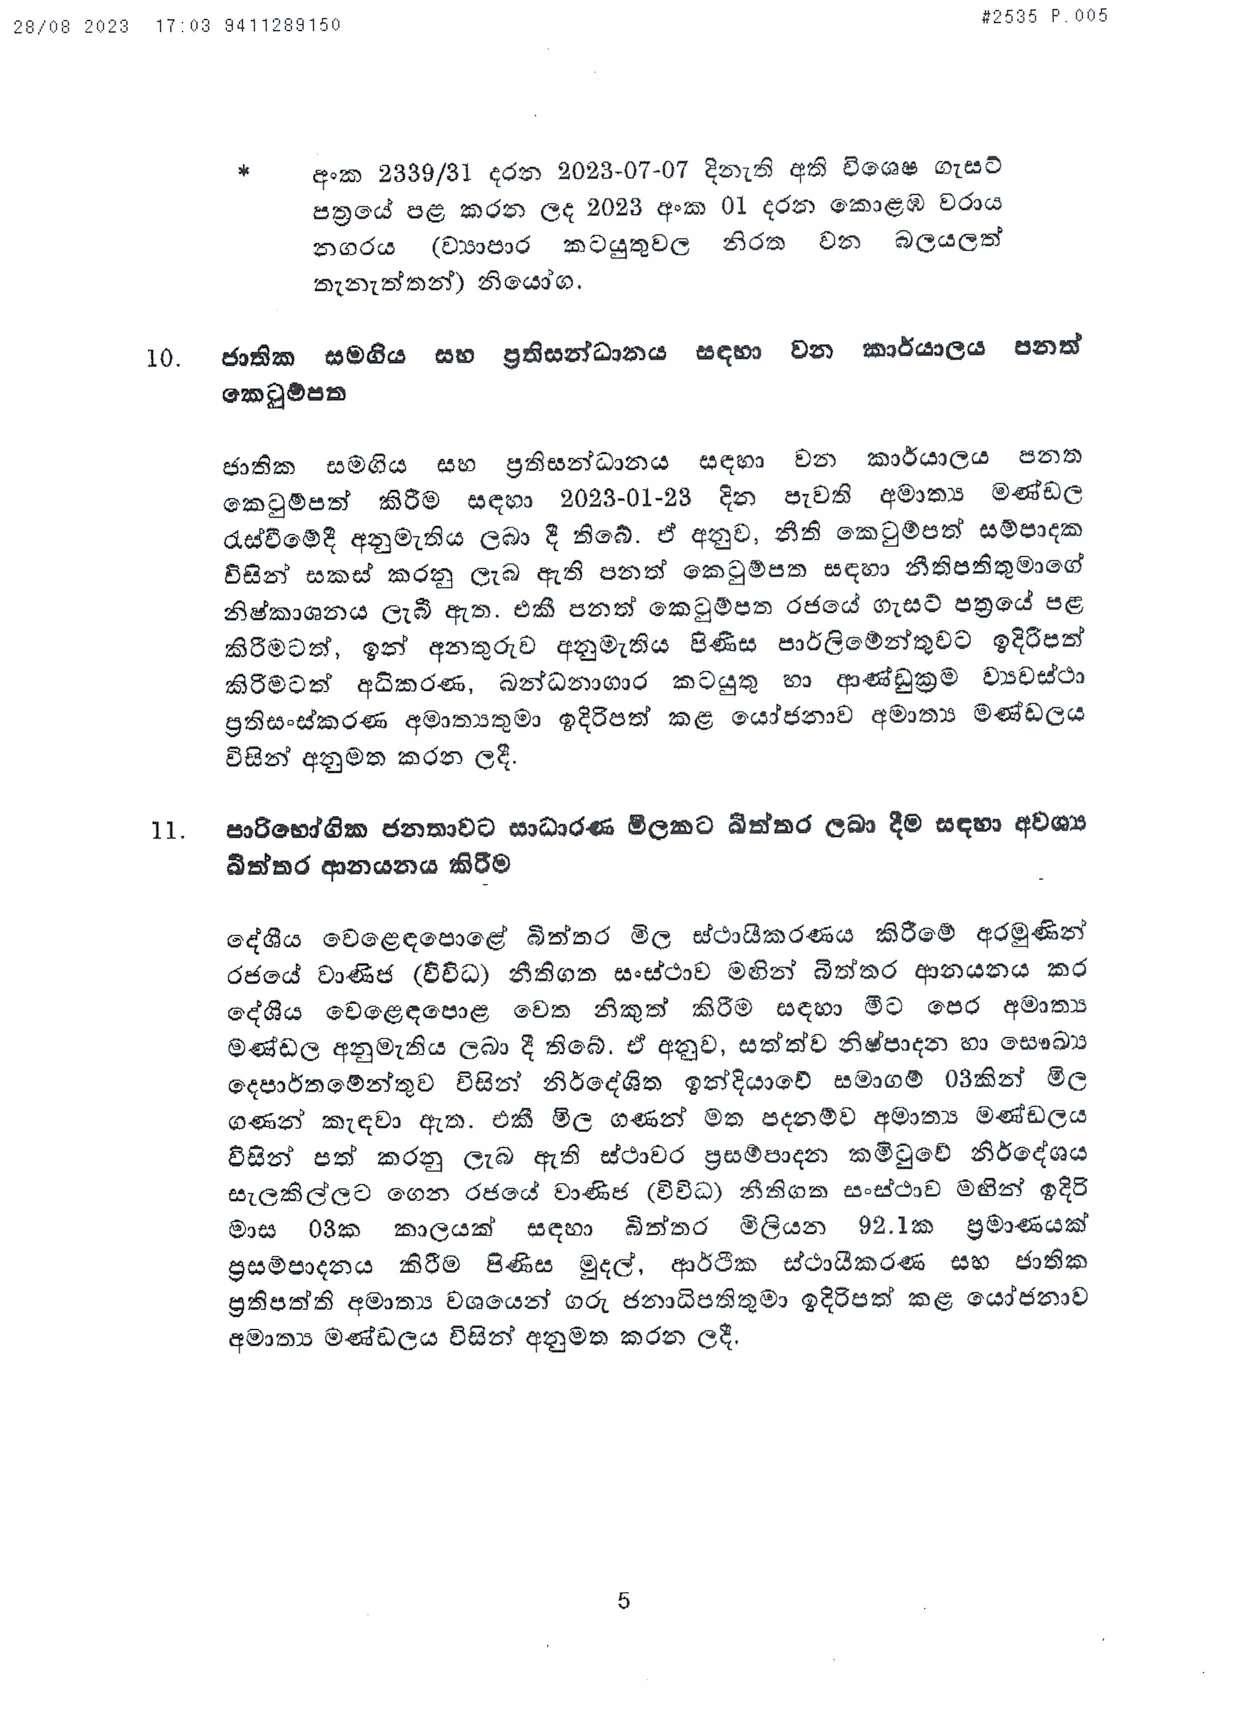 Cabinet Decision on 28.08.2023 page 005